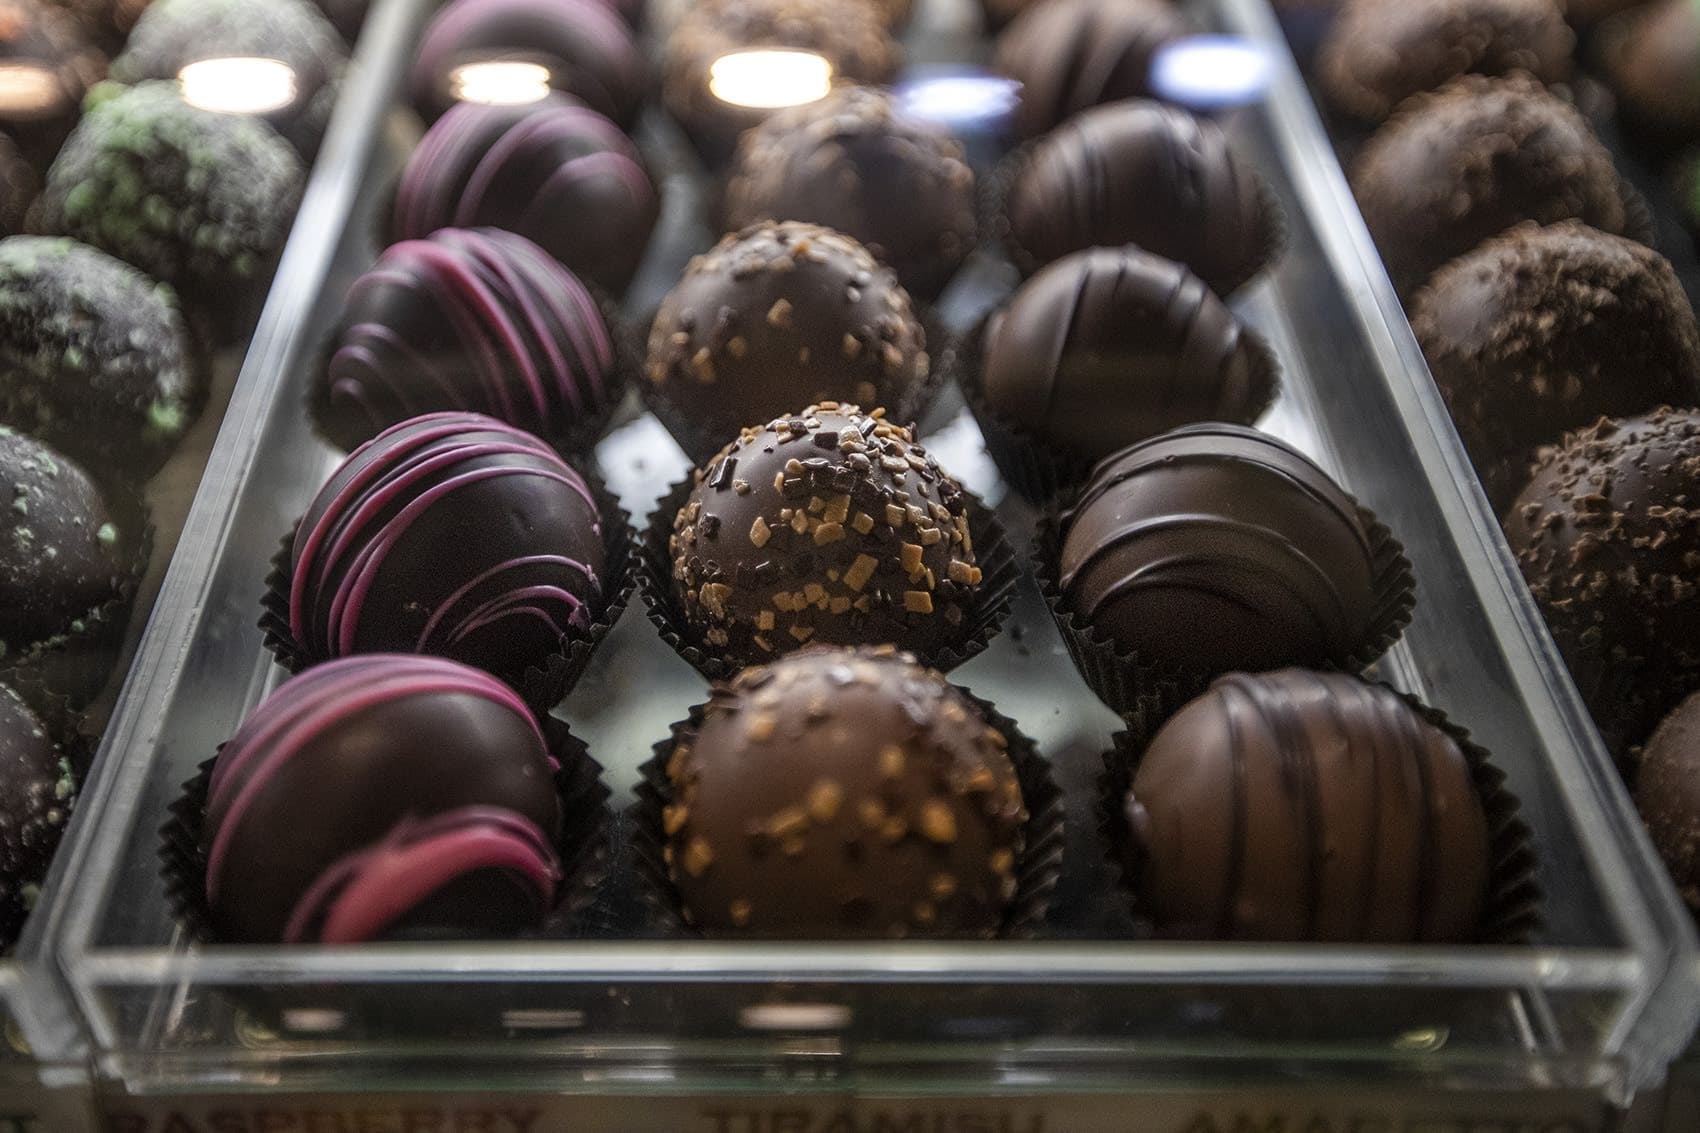 Today's truffles carry on the legacy of early French-inspired chocolates offered by amorous suitors. (Jesse Costa/WBUR)